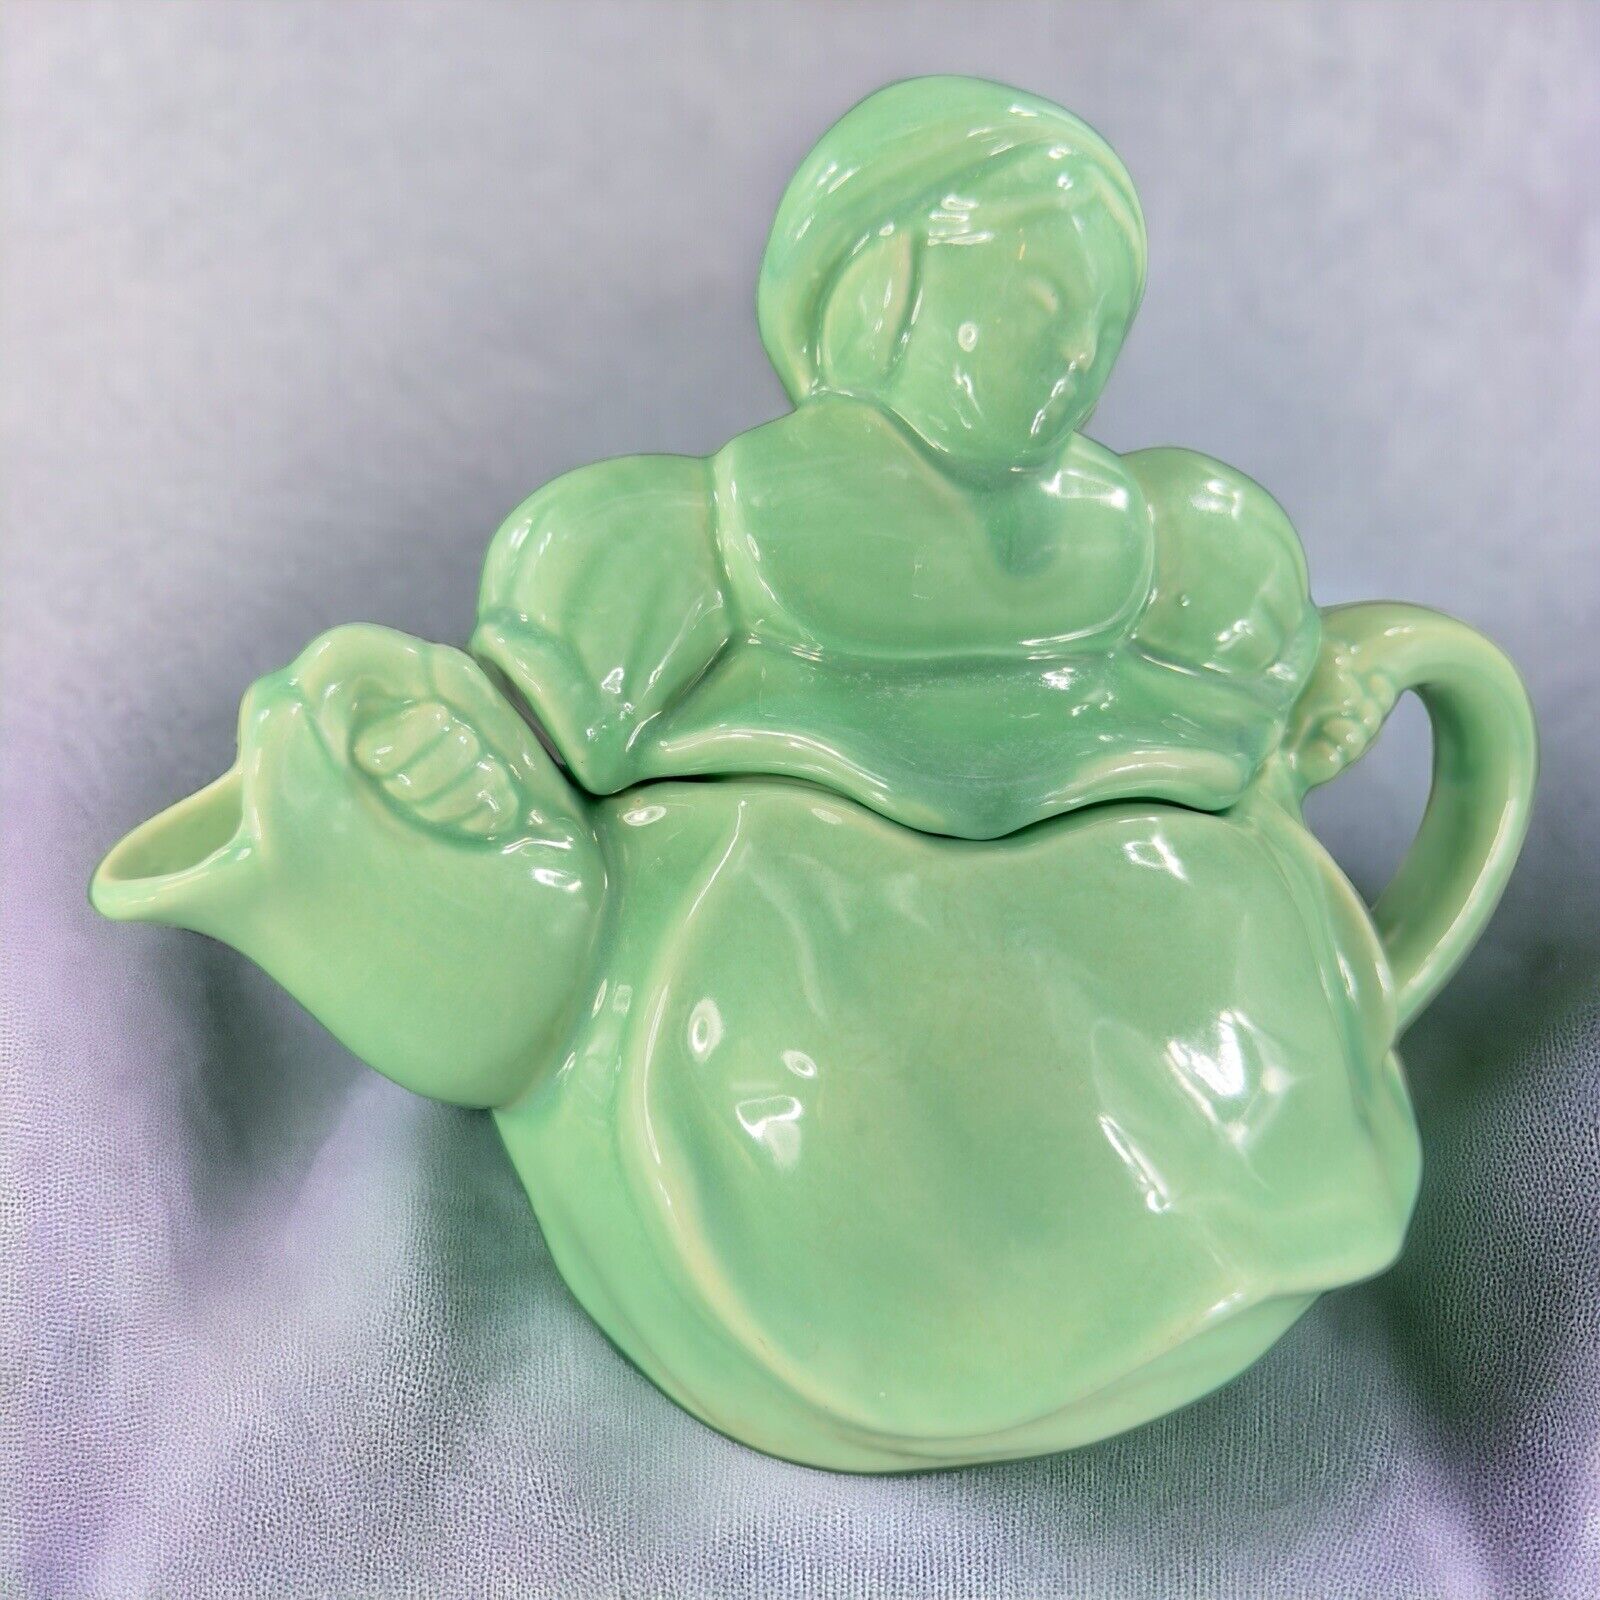 Vintage Red Wing Pottery Teapot Carafe Girl Lady Light Green Made in USA 260 VTG